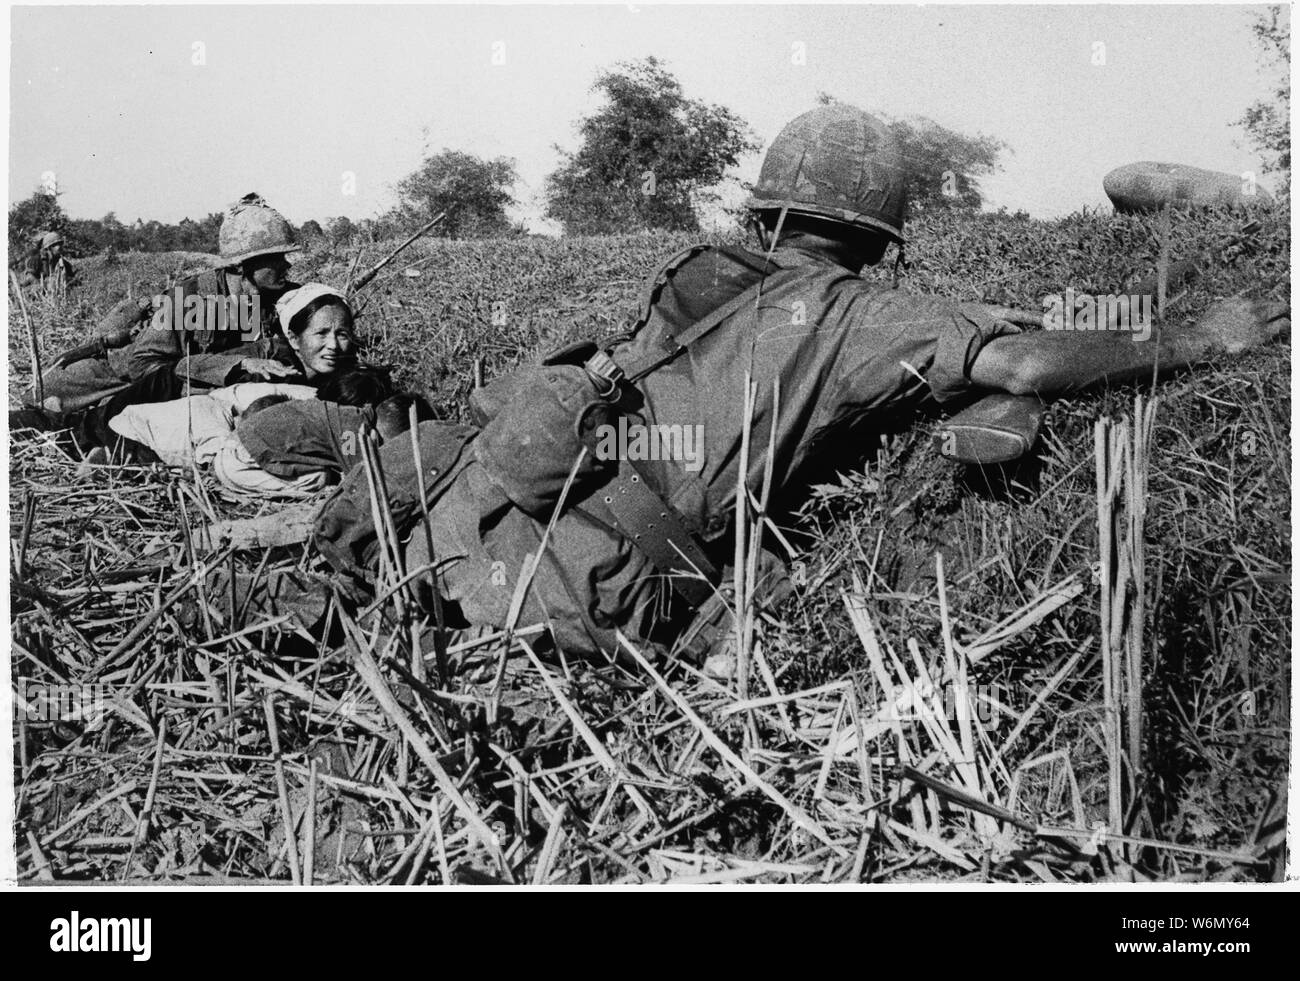 Vietnam....A soldier of the 1st Infantry Division motions to a woman refugee to keep her children's heads down during a fight with Viet Cong who had attempted to ambush the unit during a move through an area criss-crossed with bamboo hedgerows. Stock Photo